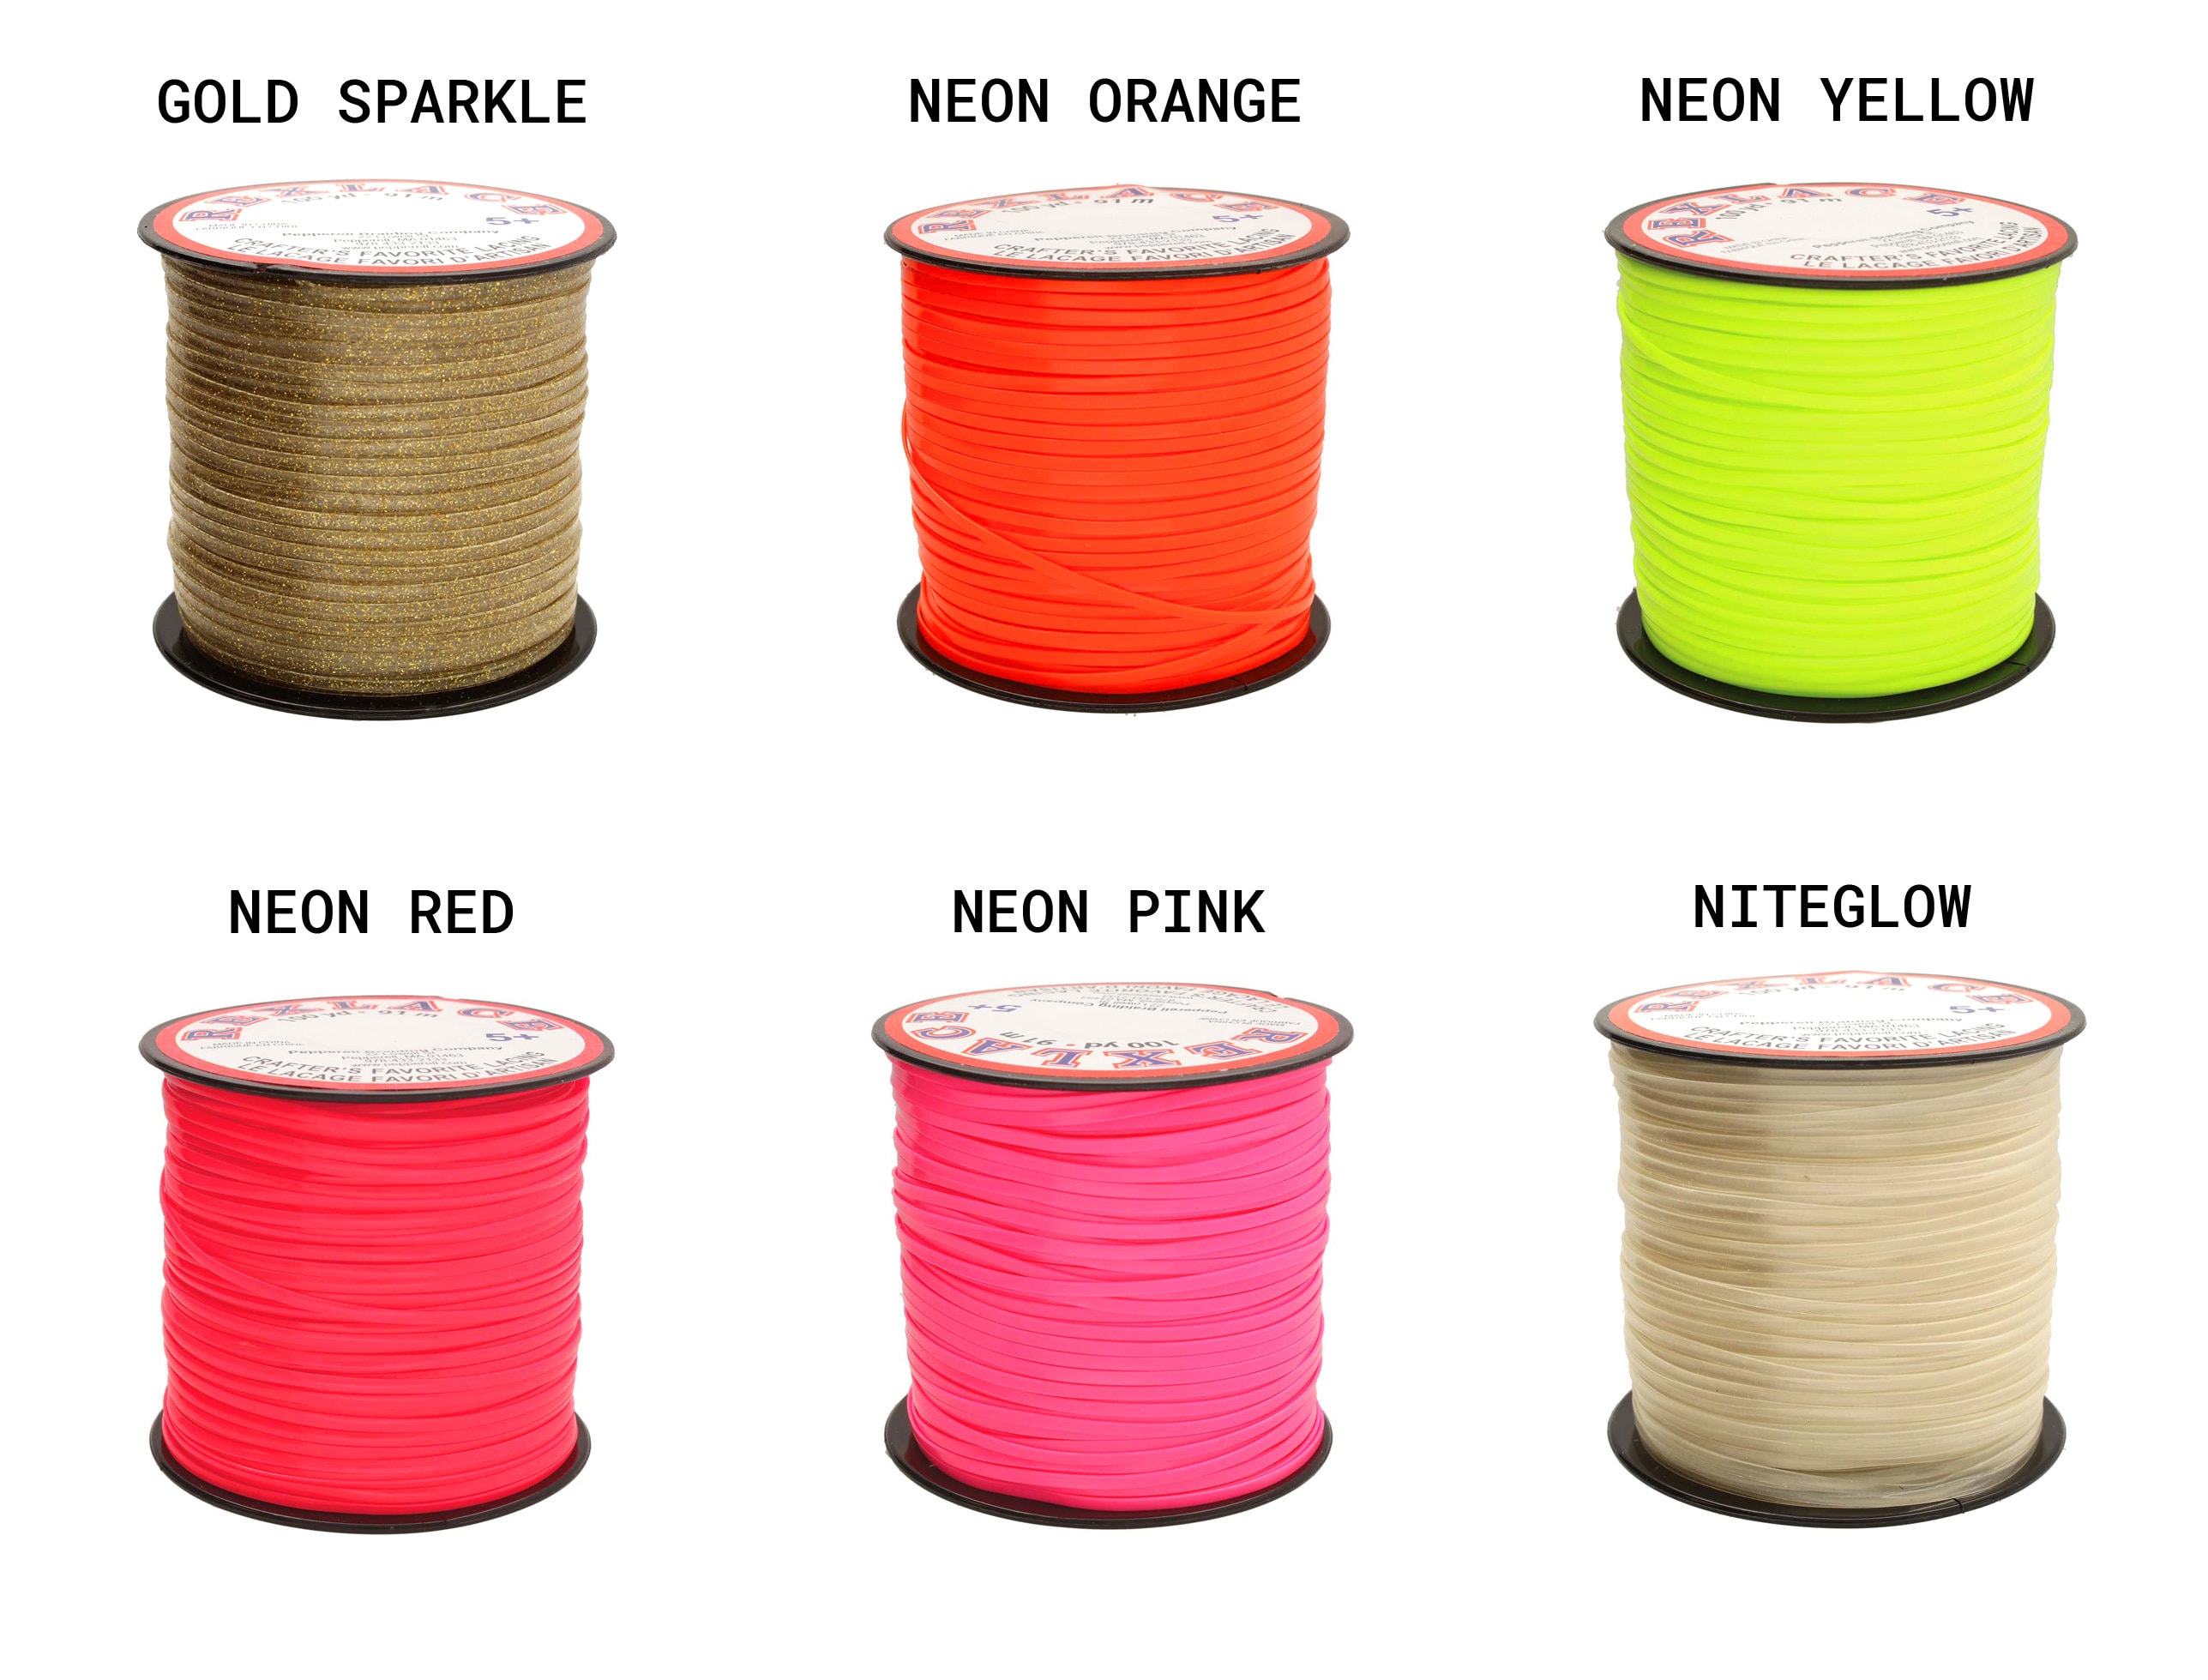 REXLACE® PVC Plastic Flat Cord Many Different Colors Spool With 100 Yards  91m Cord 2.35mmx0.76mm for Craft and Hobby Applications 